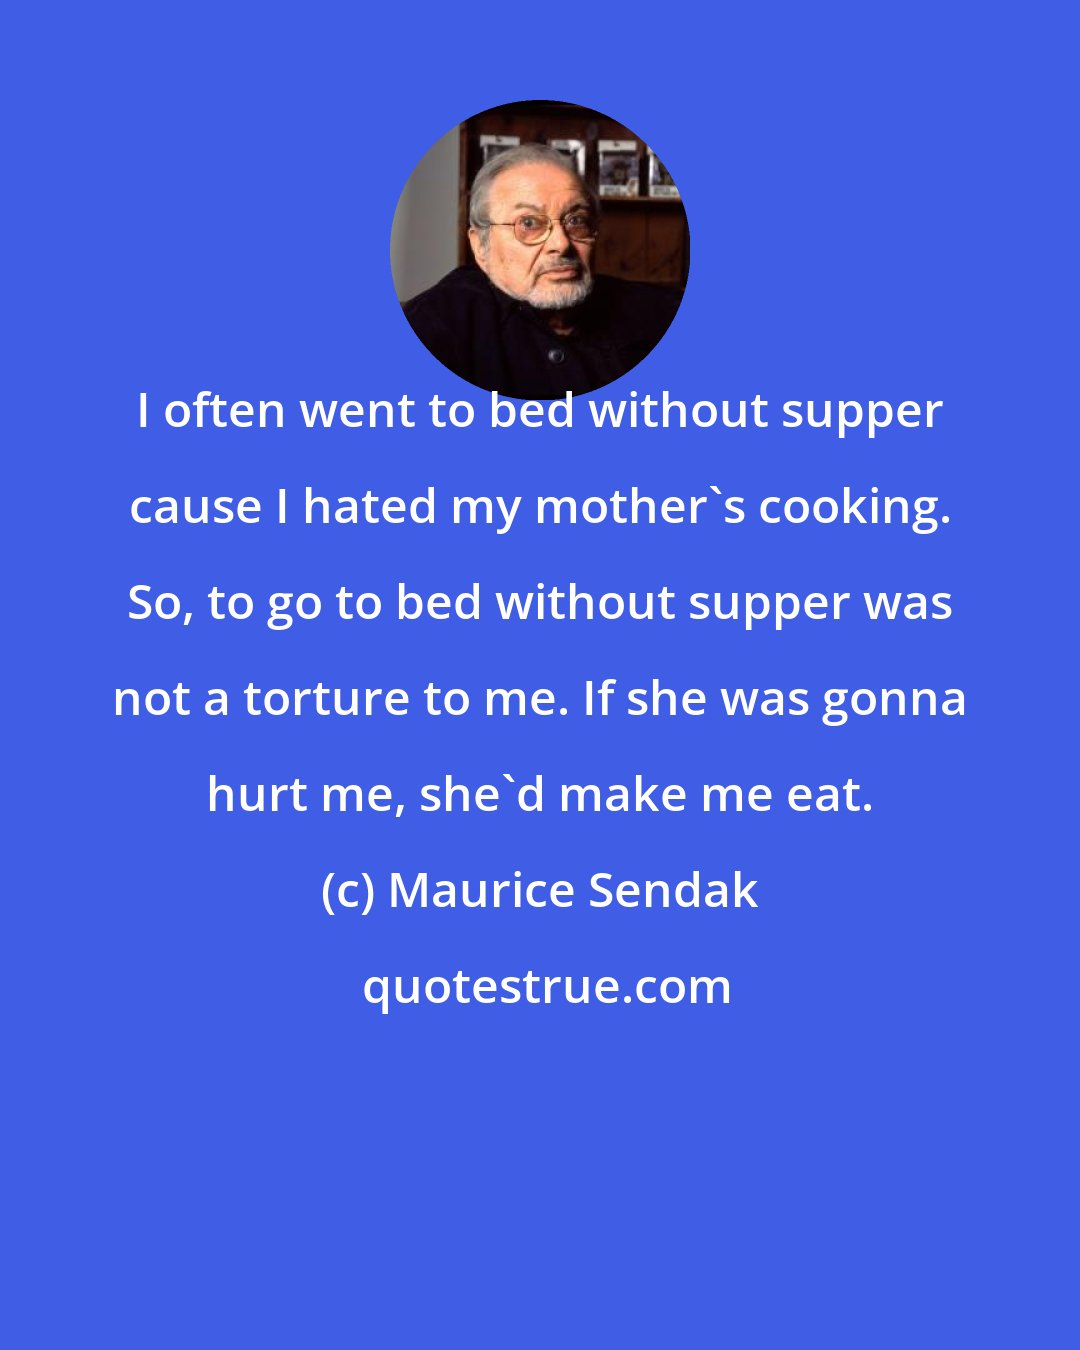 Maurice Sendak: I often went to bed without supper cause I hated my mother's cooking. So, to go to bed without supper was not a torture to me. If she was gonna hurt me, she'd make me eat.